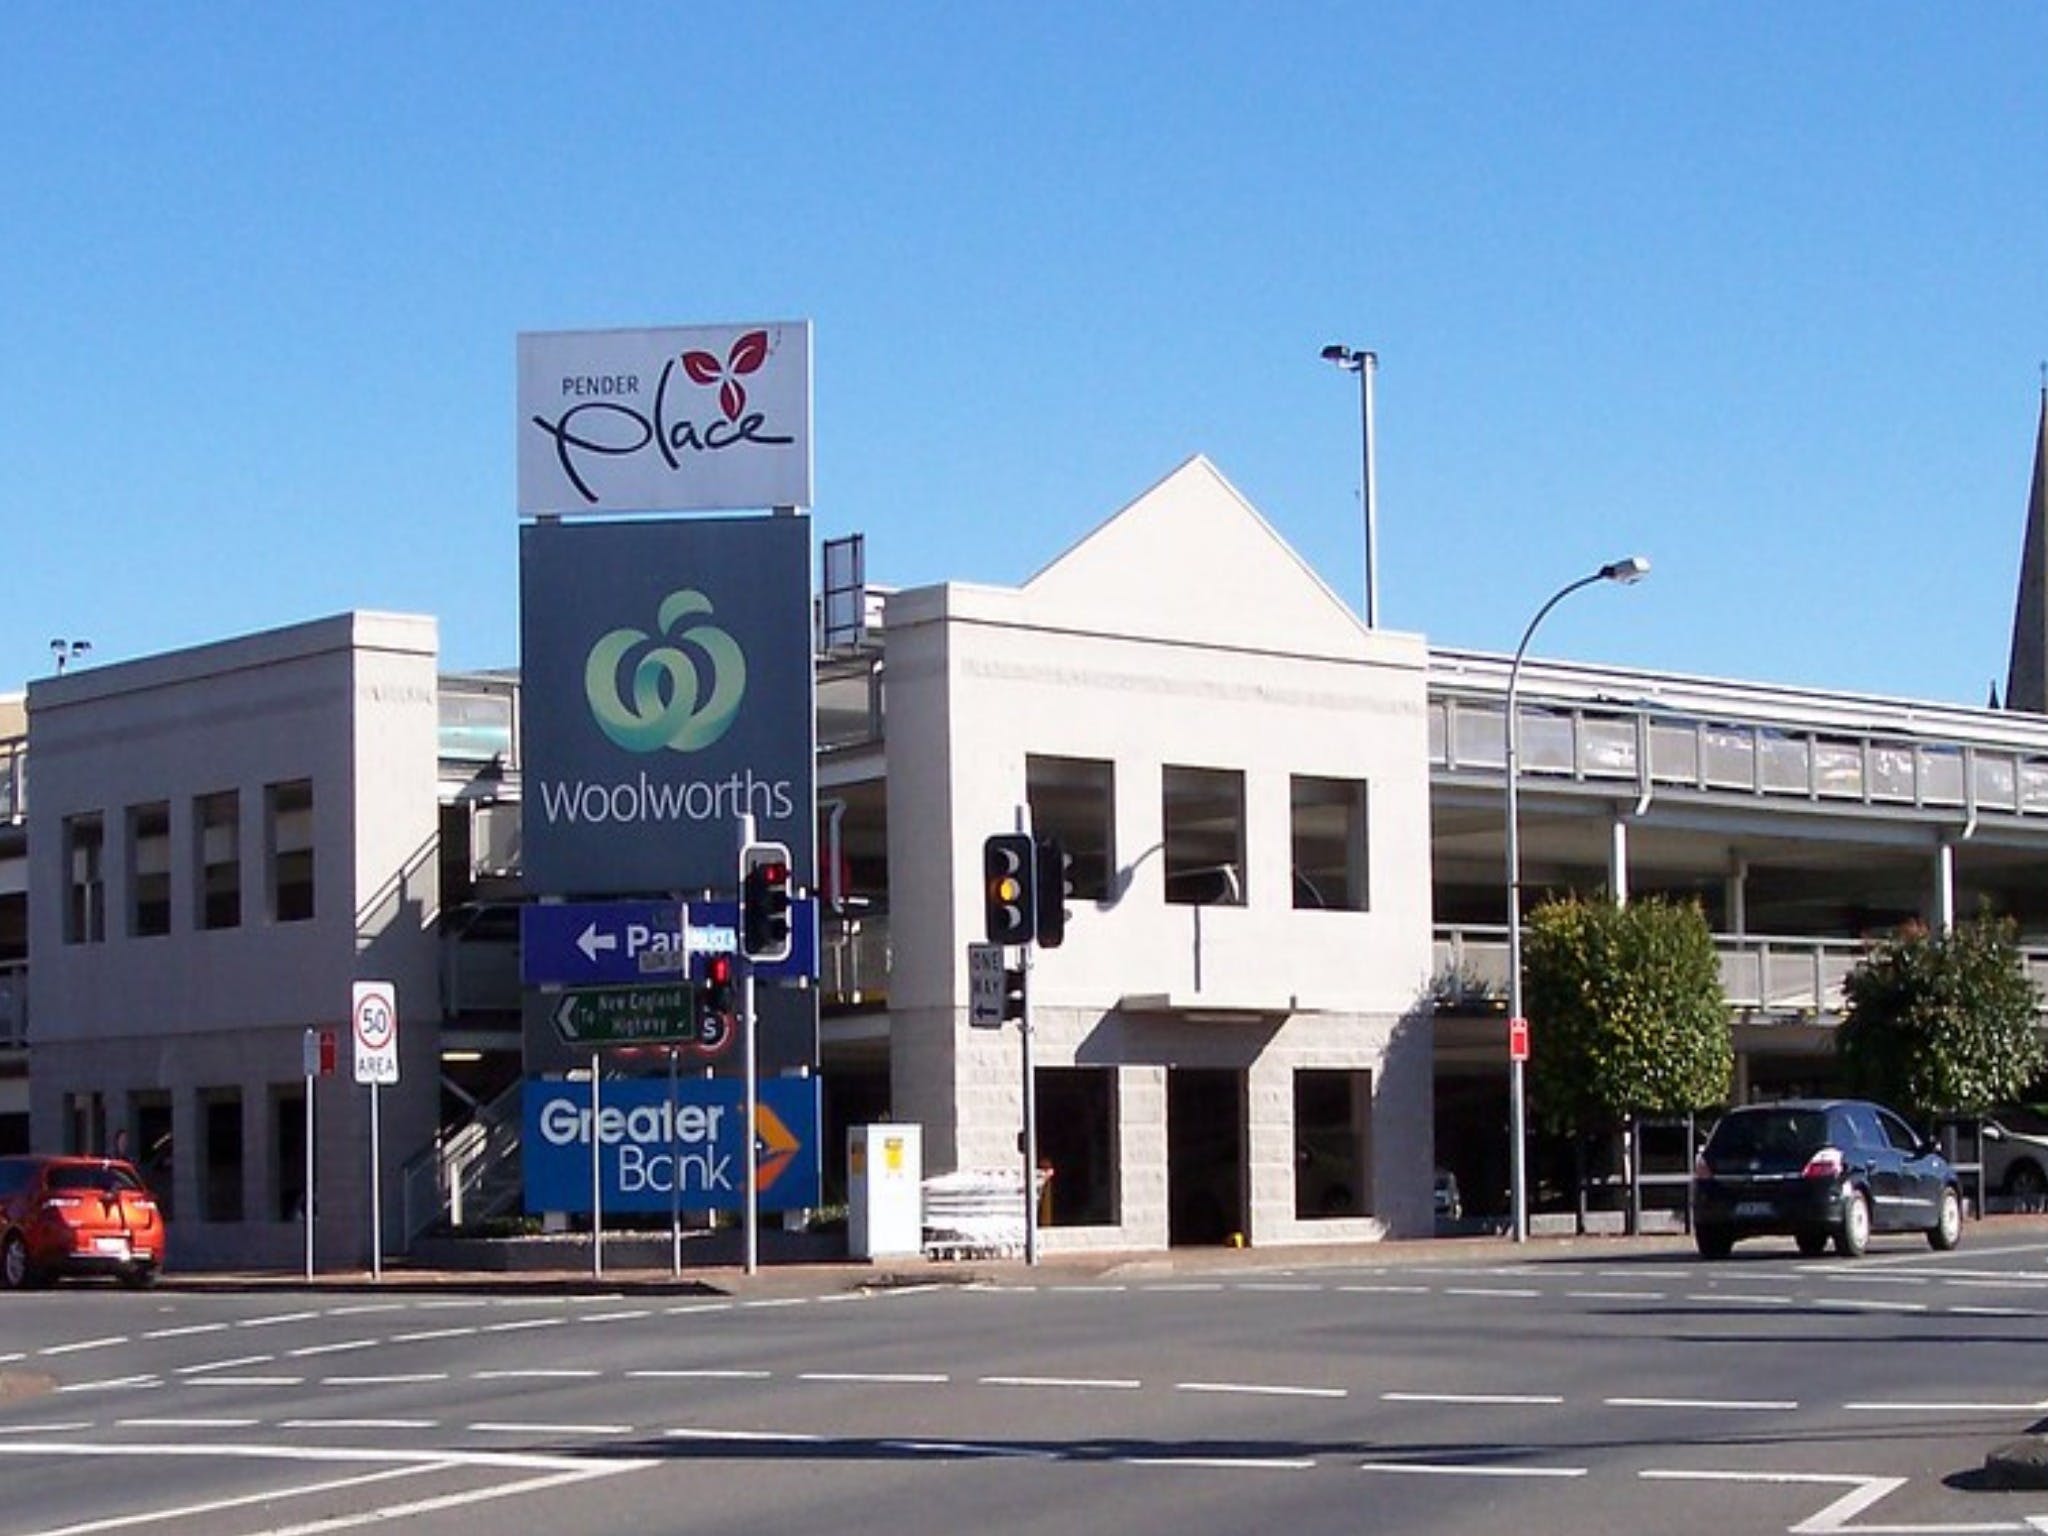 Pender Place Shopping Centre - Wagga Wagga Accommodation